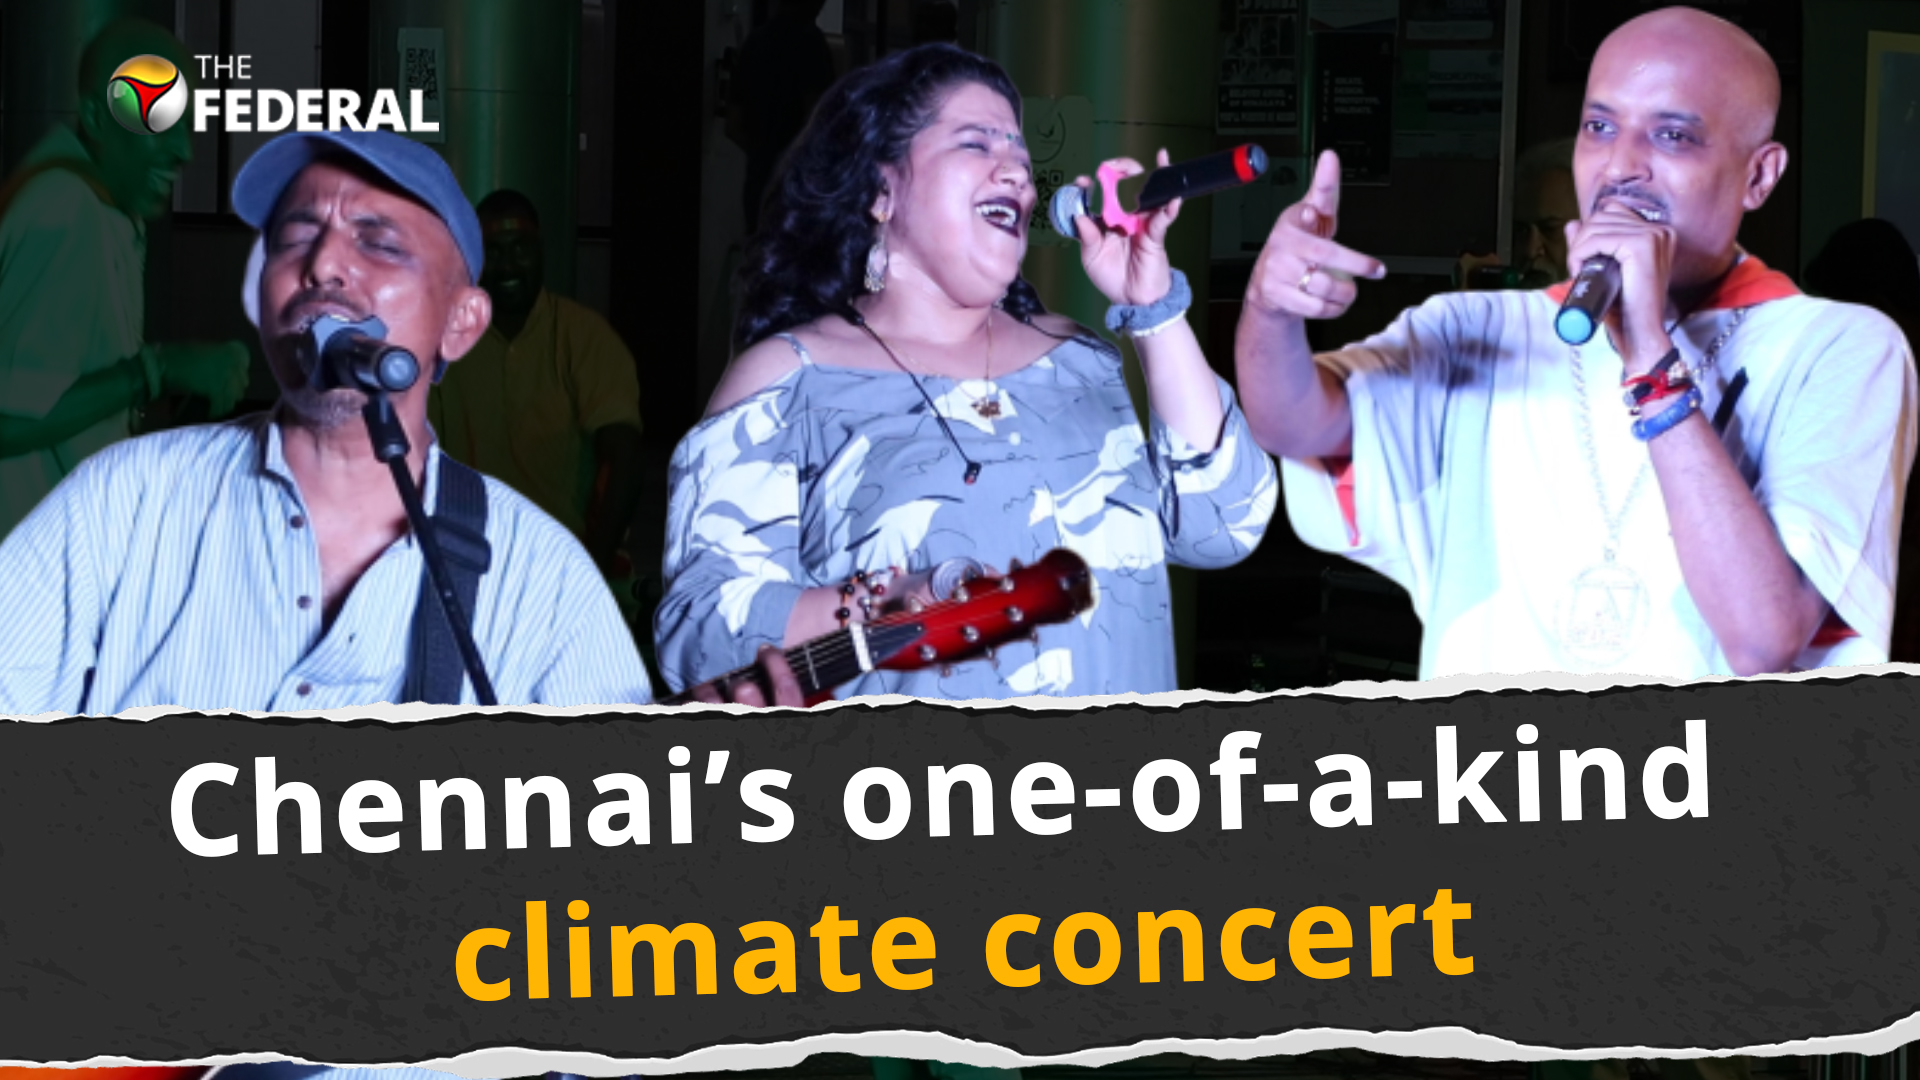 Ignore climate change at your own peril, say Musicians